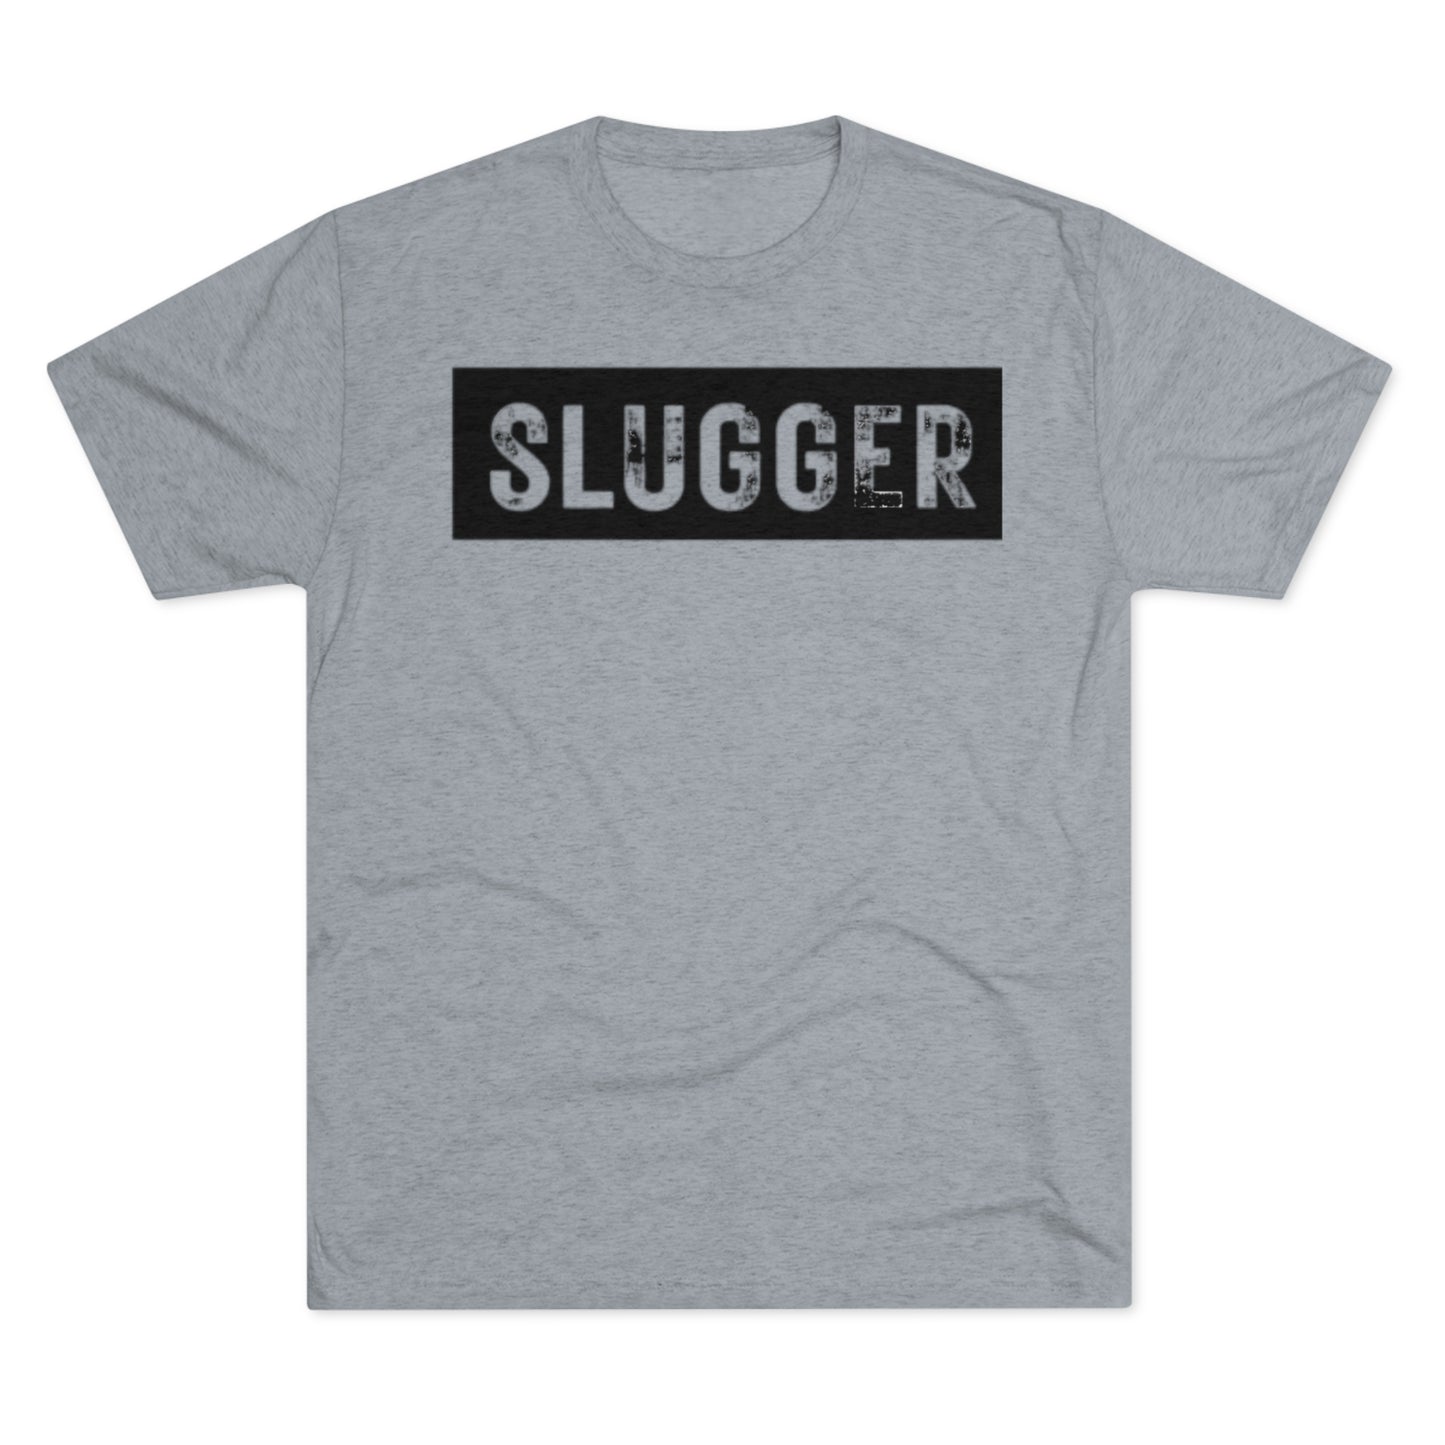 Slugger Block - Baseball Bliss Tri-Blend Tee: Unbelievably Soft Comfort with a Stylish Edge - Perfect for Baseball Enthusiasts!